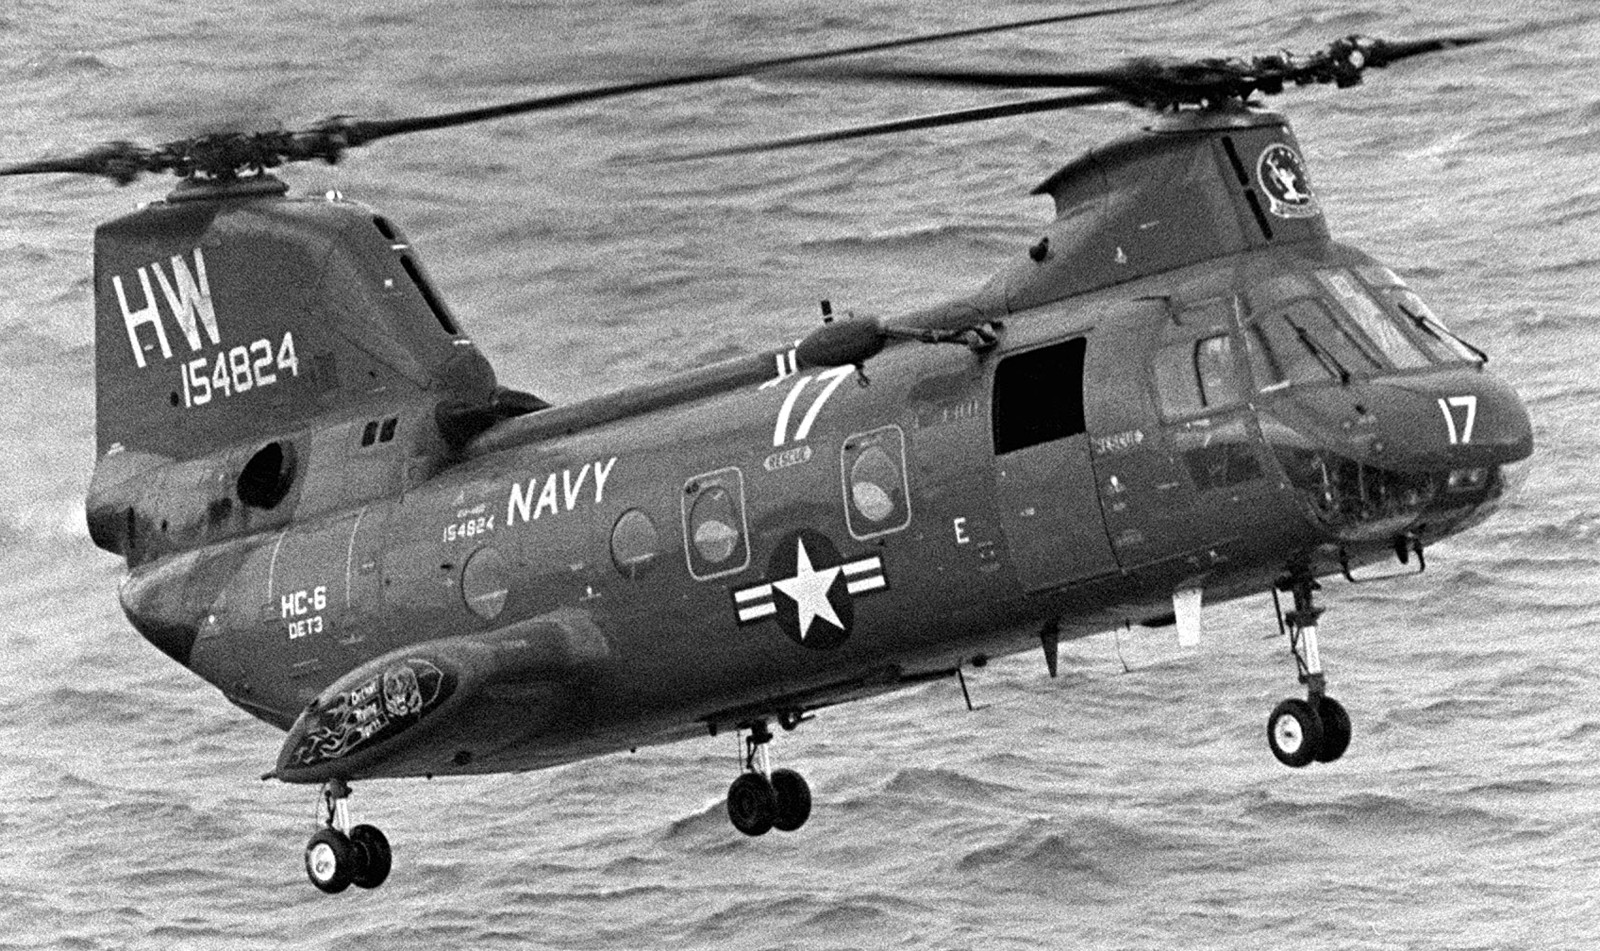 hc-6 chargers helicopter combat support squadron navy ch-46 sea knight 89